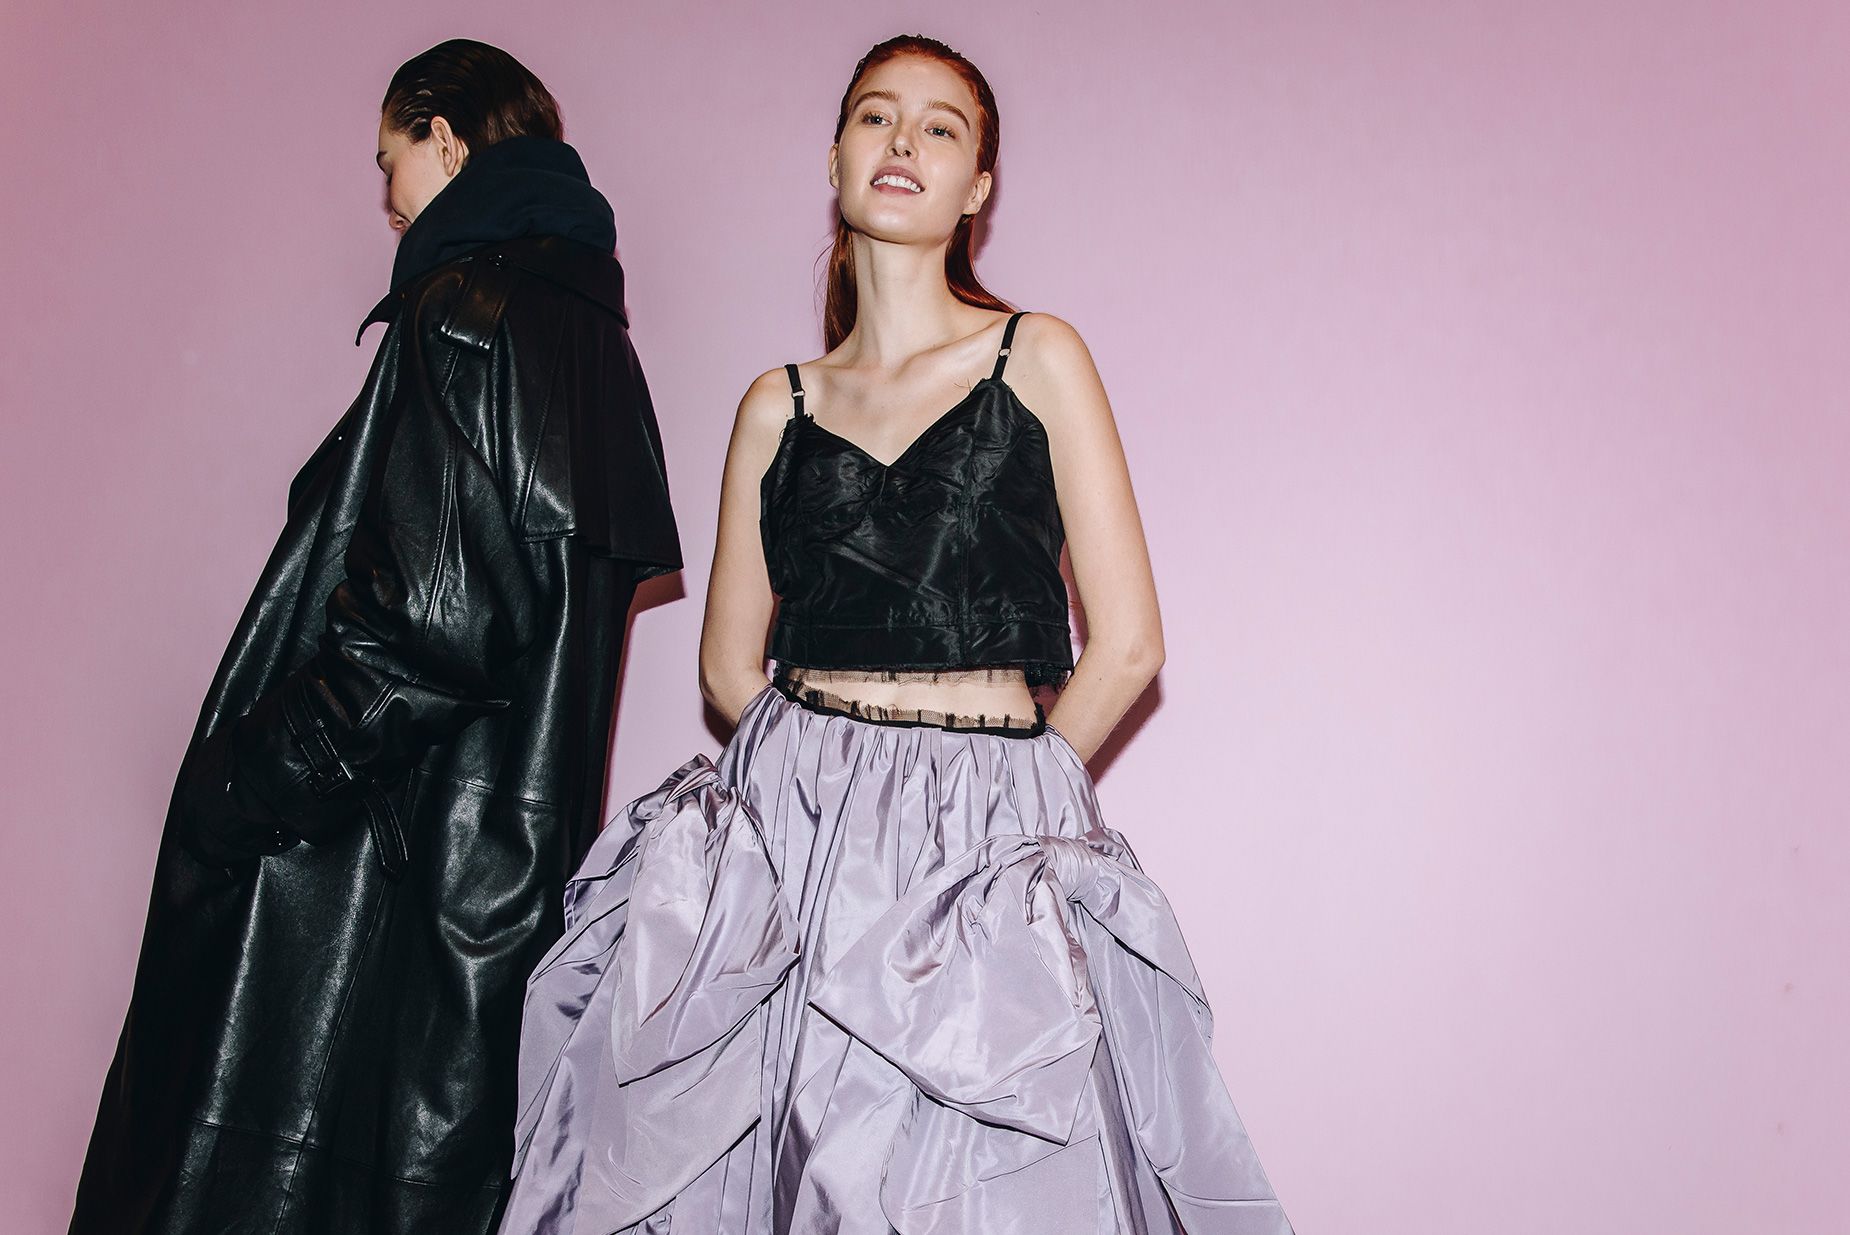 As part of its circularity initiatives, Coach upcycled secondhand materials into denim, leather and shearling pieces, and turned taffeta party dresses into tops and skirts.